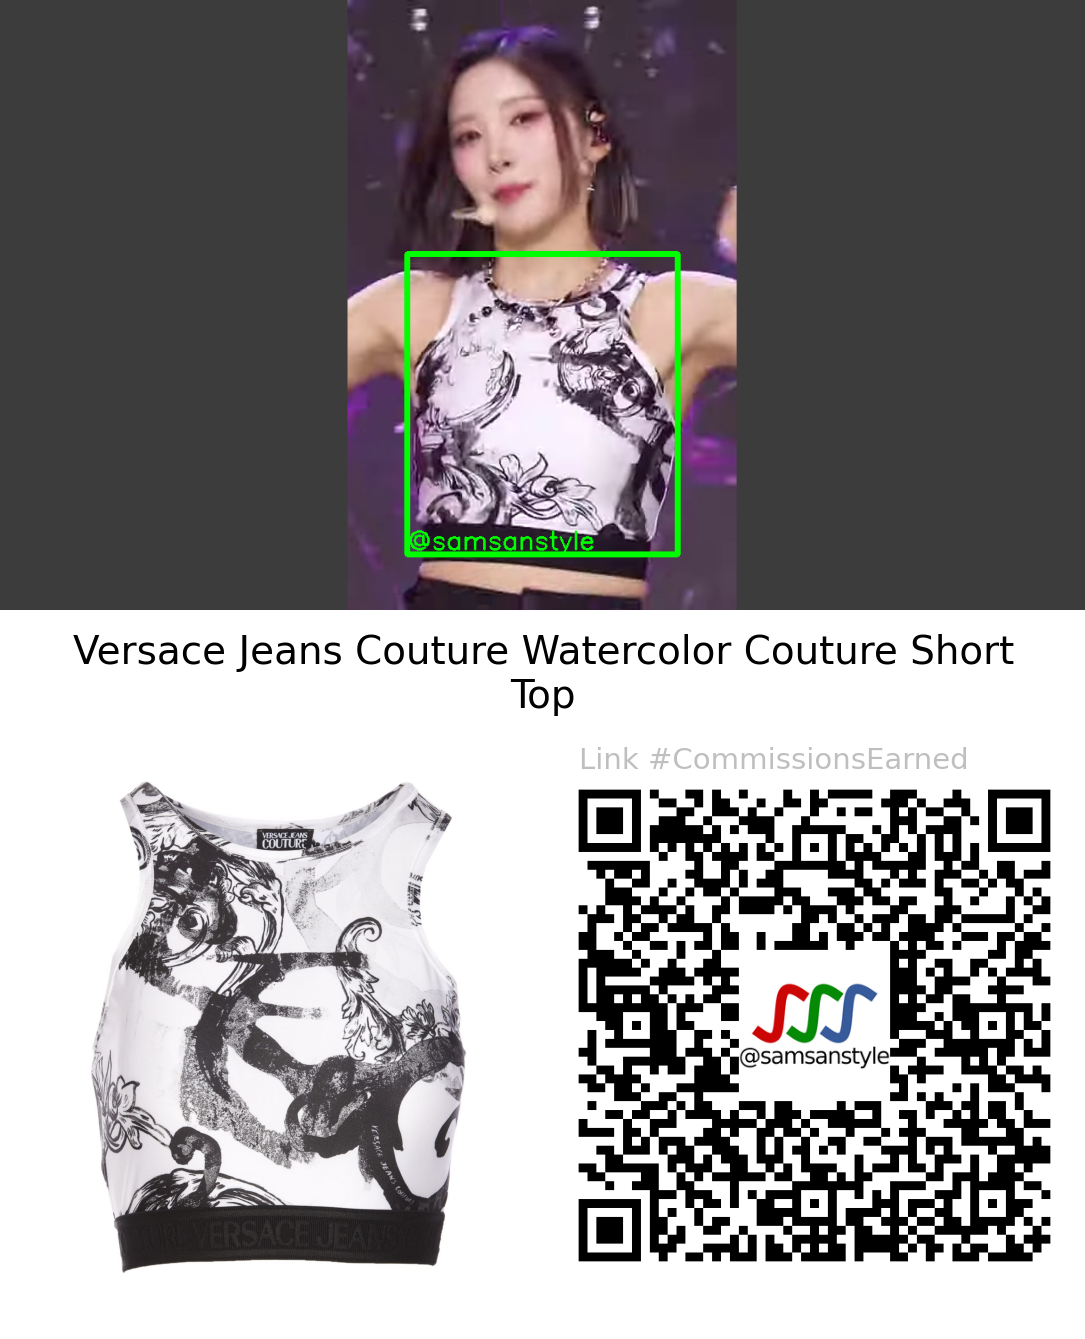 Purple Kiss Yuki | BBB SBS MTV The Show | Versace Jeans Couture Watercolor Couture Short Top